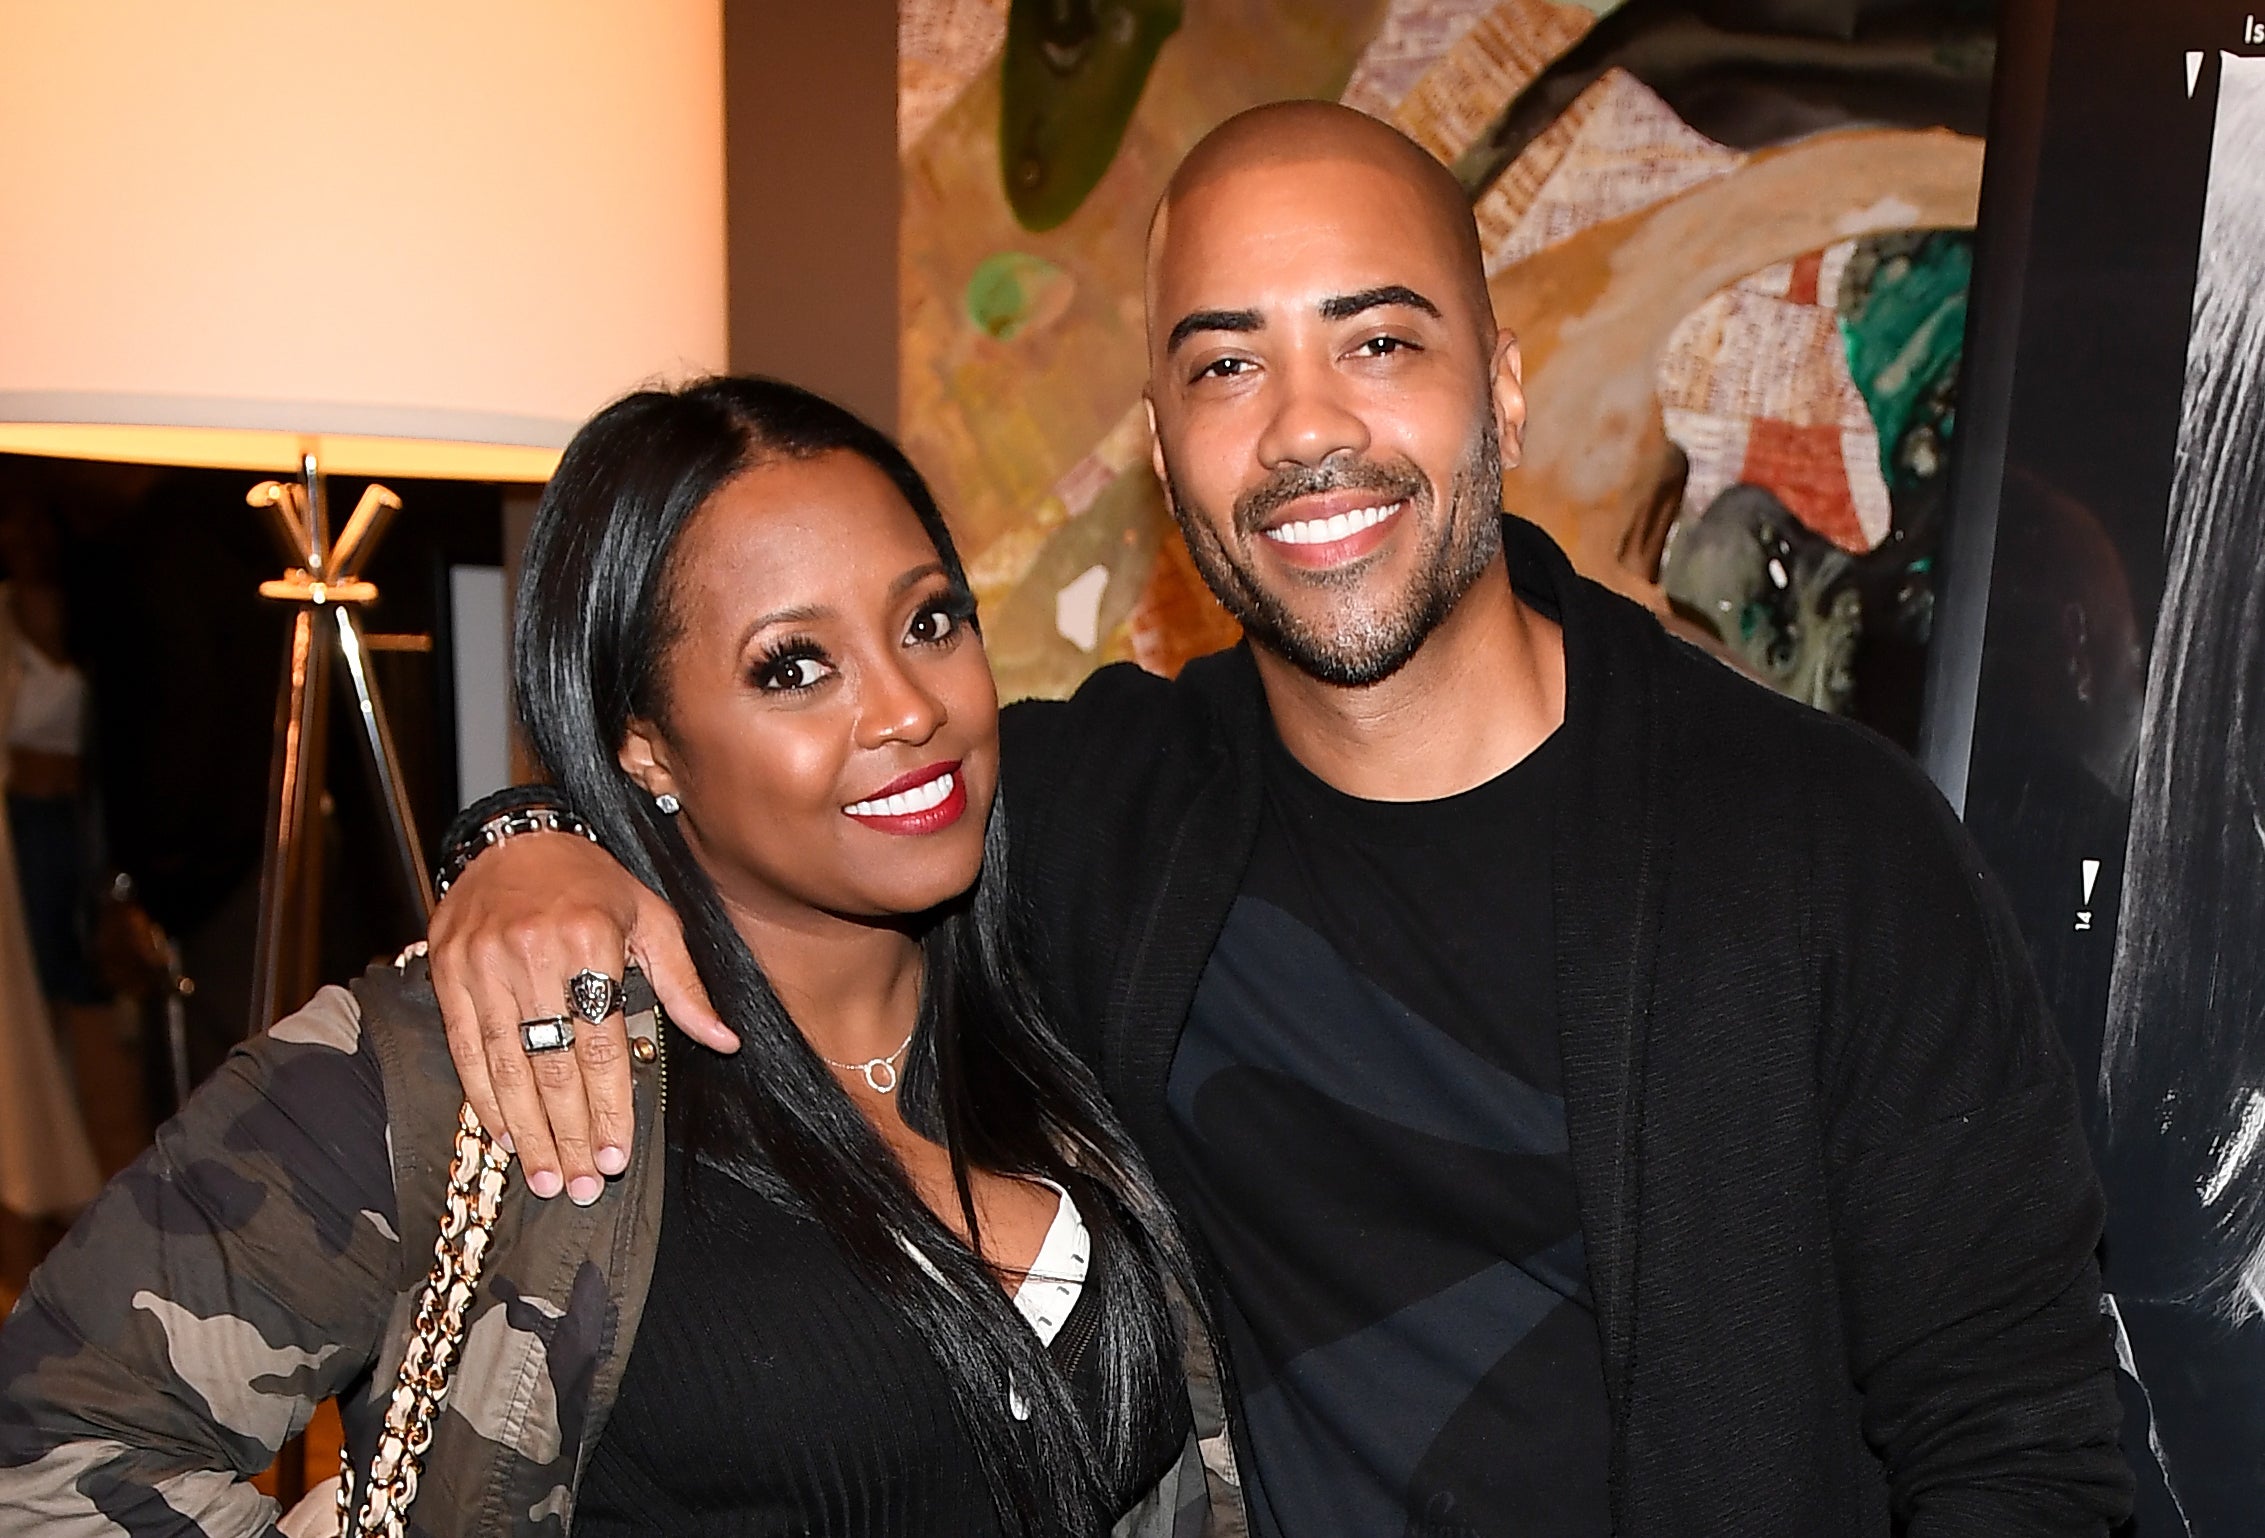 Actors Keshia Knight Pulliam and Brad James Made Memories On Their Boat Date